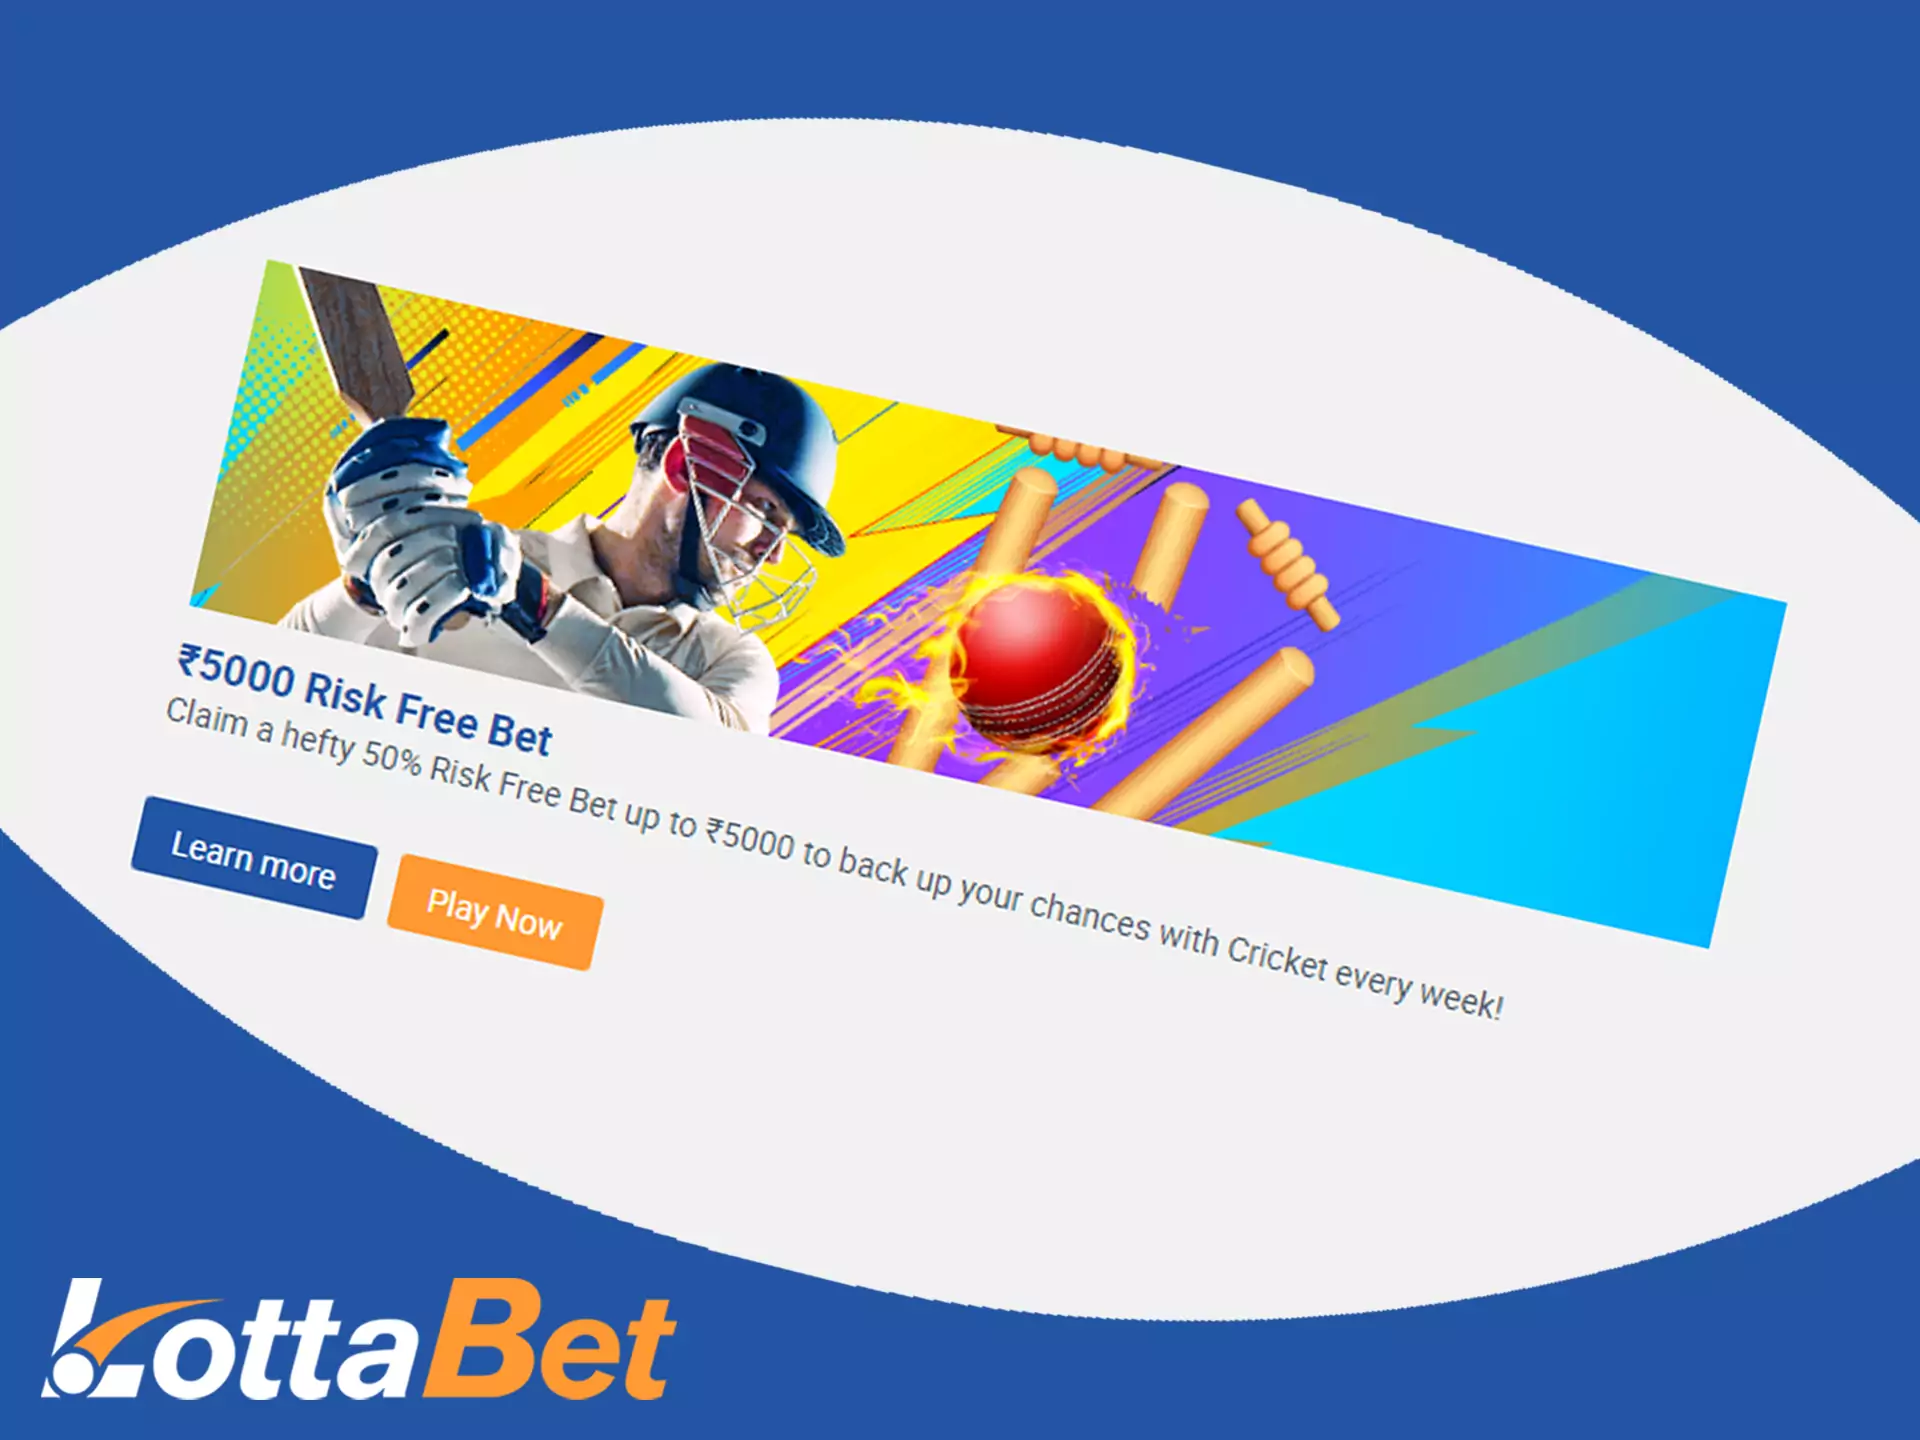 Make risk free bet and win more prizes.